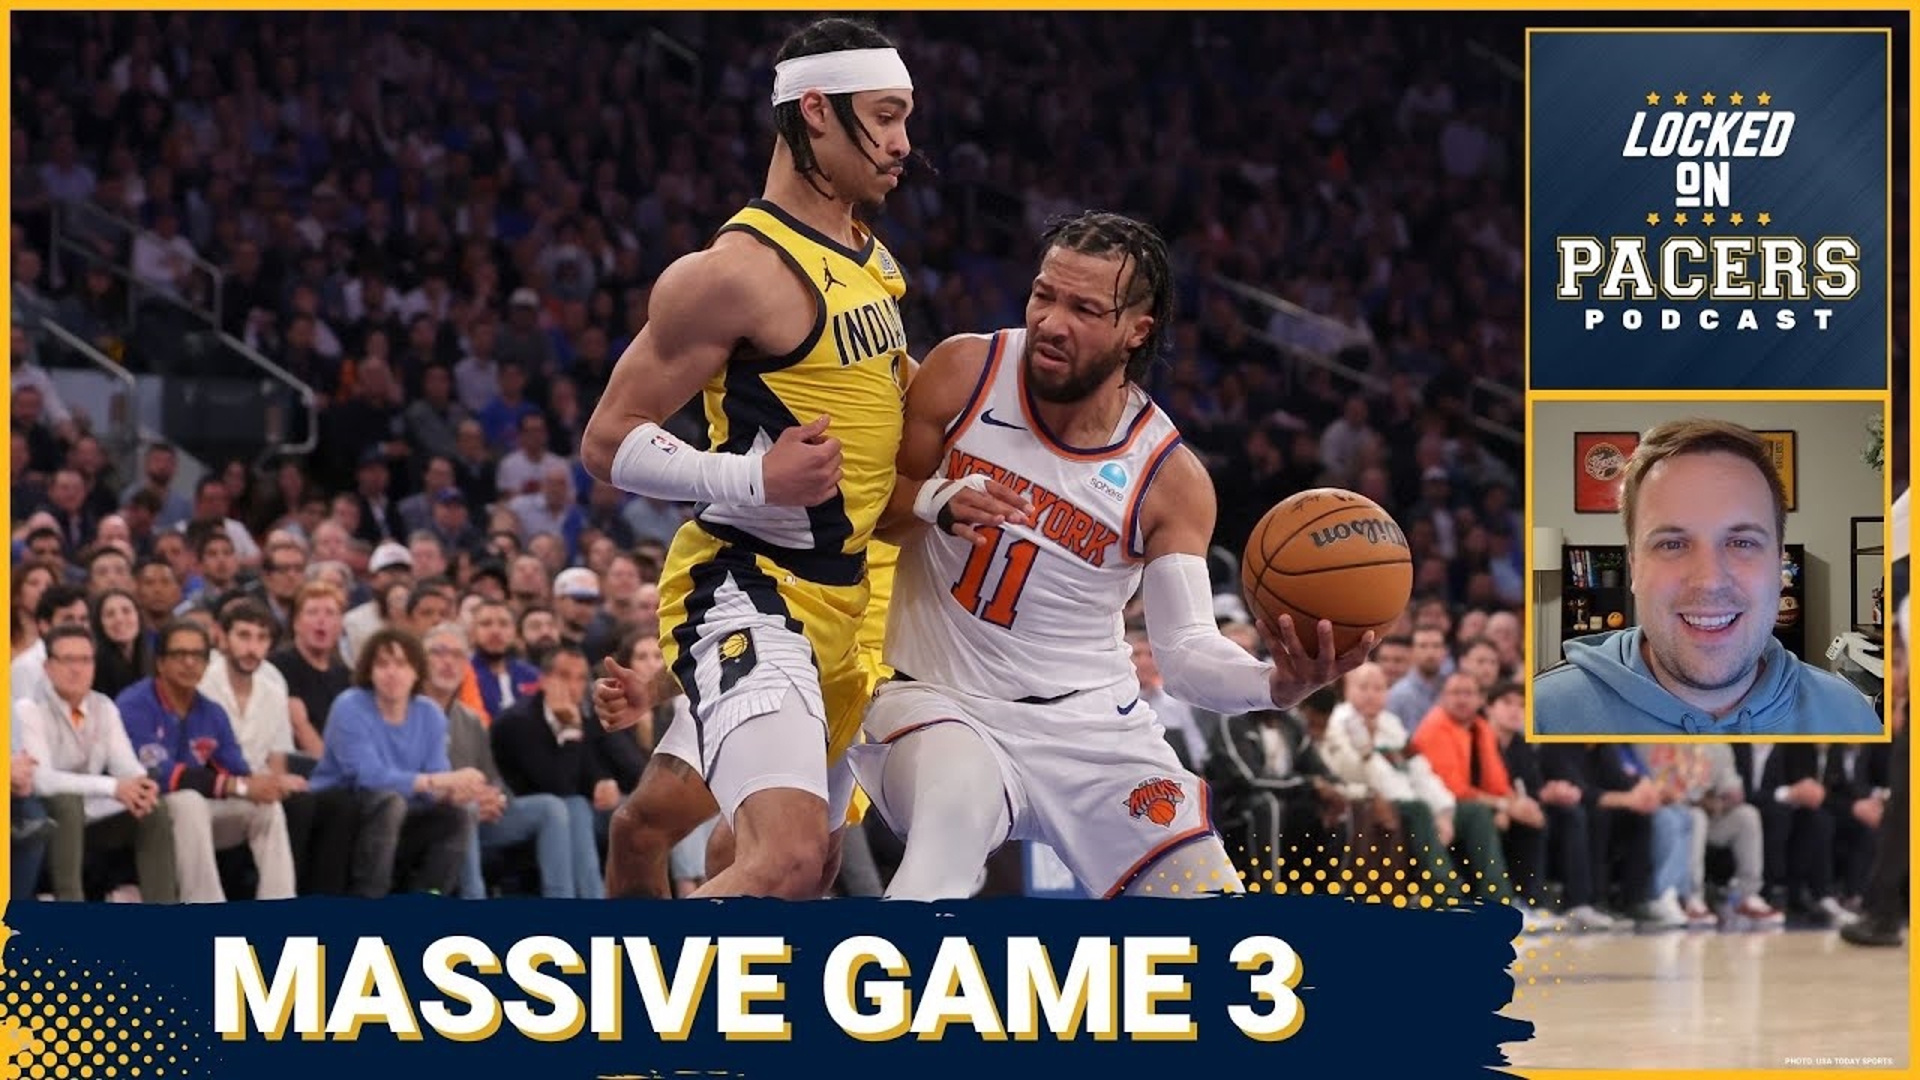 The Indiana Pacers host the New York Knicks for Game 3 of their second-round series tonight. What do the Pacers need to do to win? Host Tony East breaks it all down.